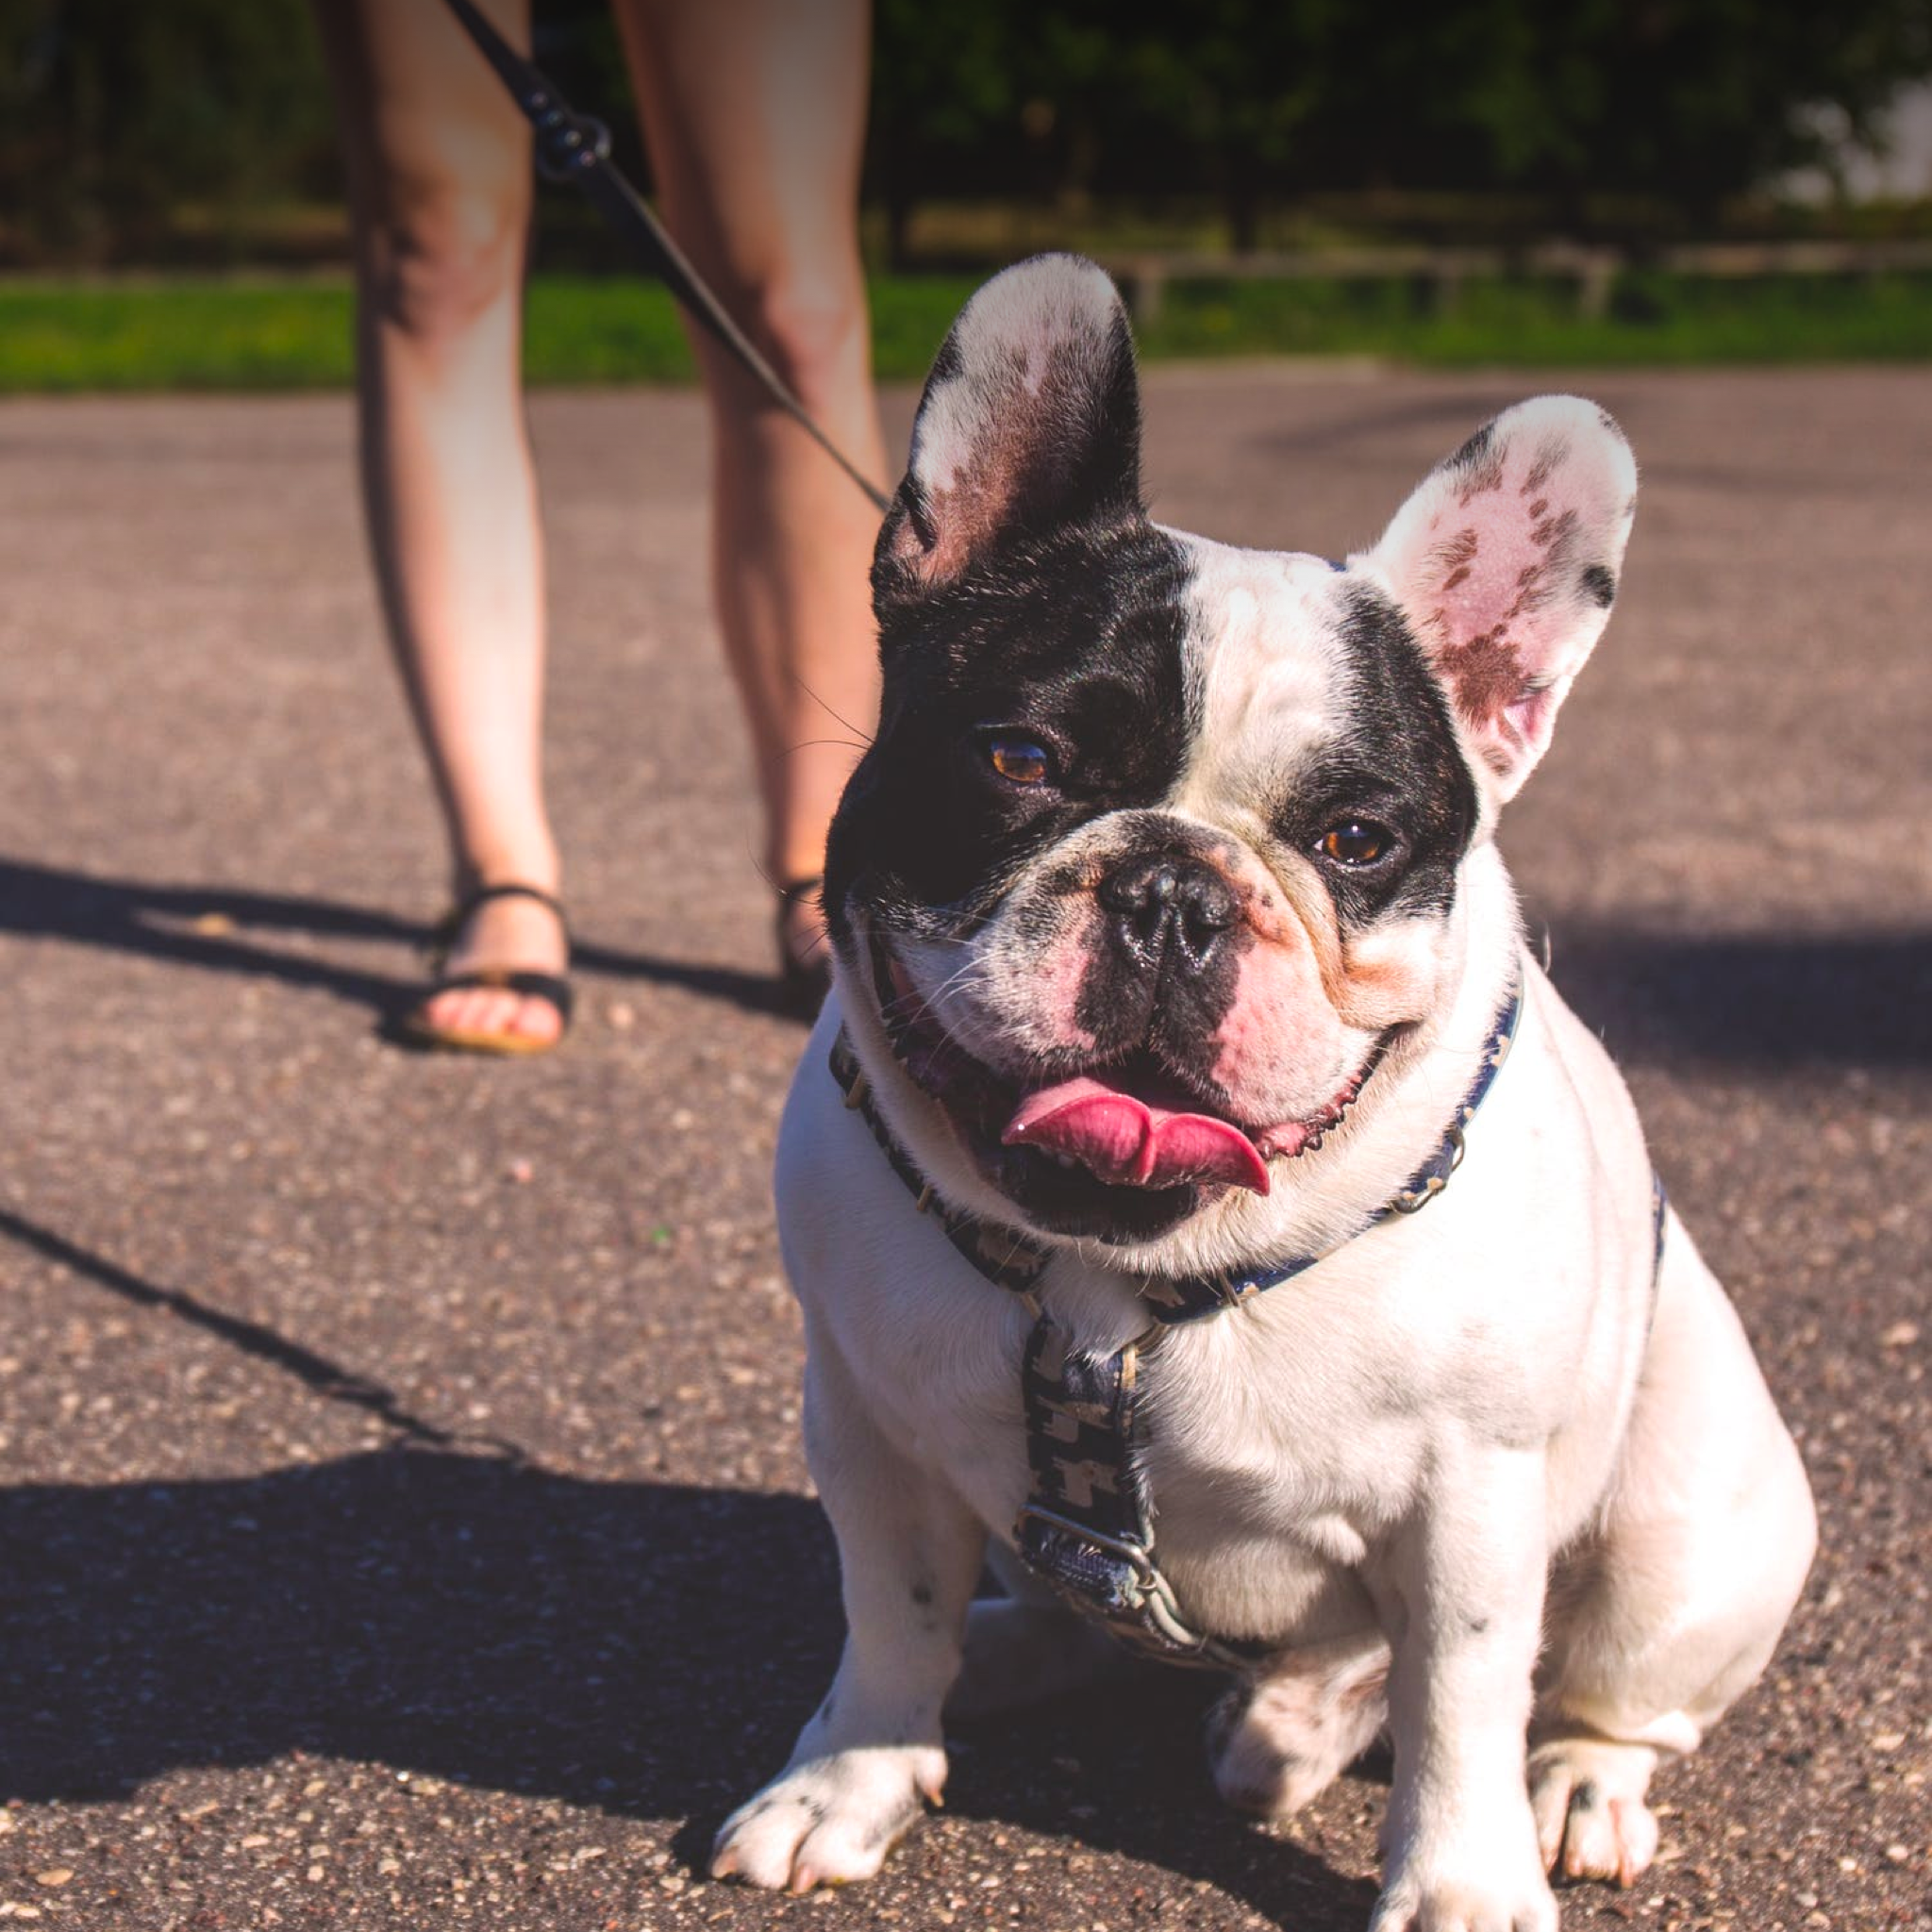 A friendly french bulldog out on a walk with a woman